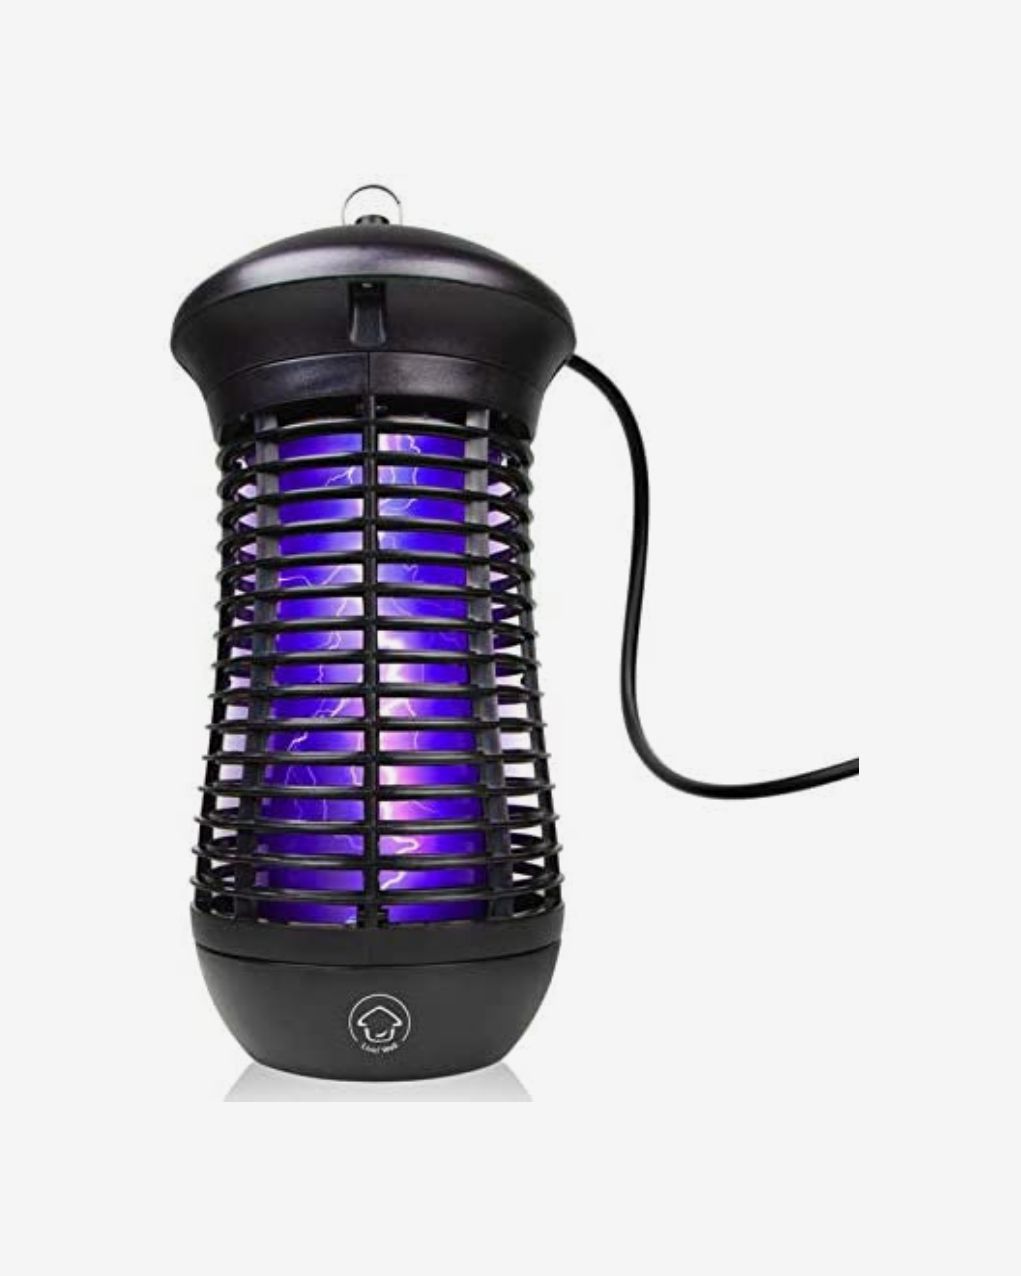 Insect Zapper Bug Killer for Indoor use Effective Against Flies Beetles and Bugs Grashal 20W Electronic Bug Zapper Mosquitos Wasps Cockroaches Moths 